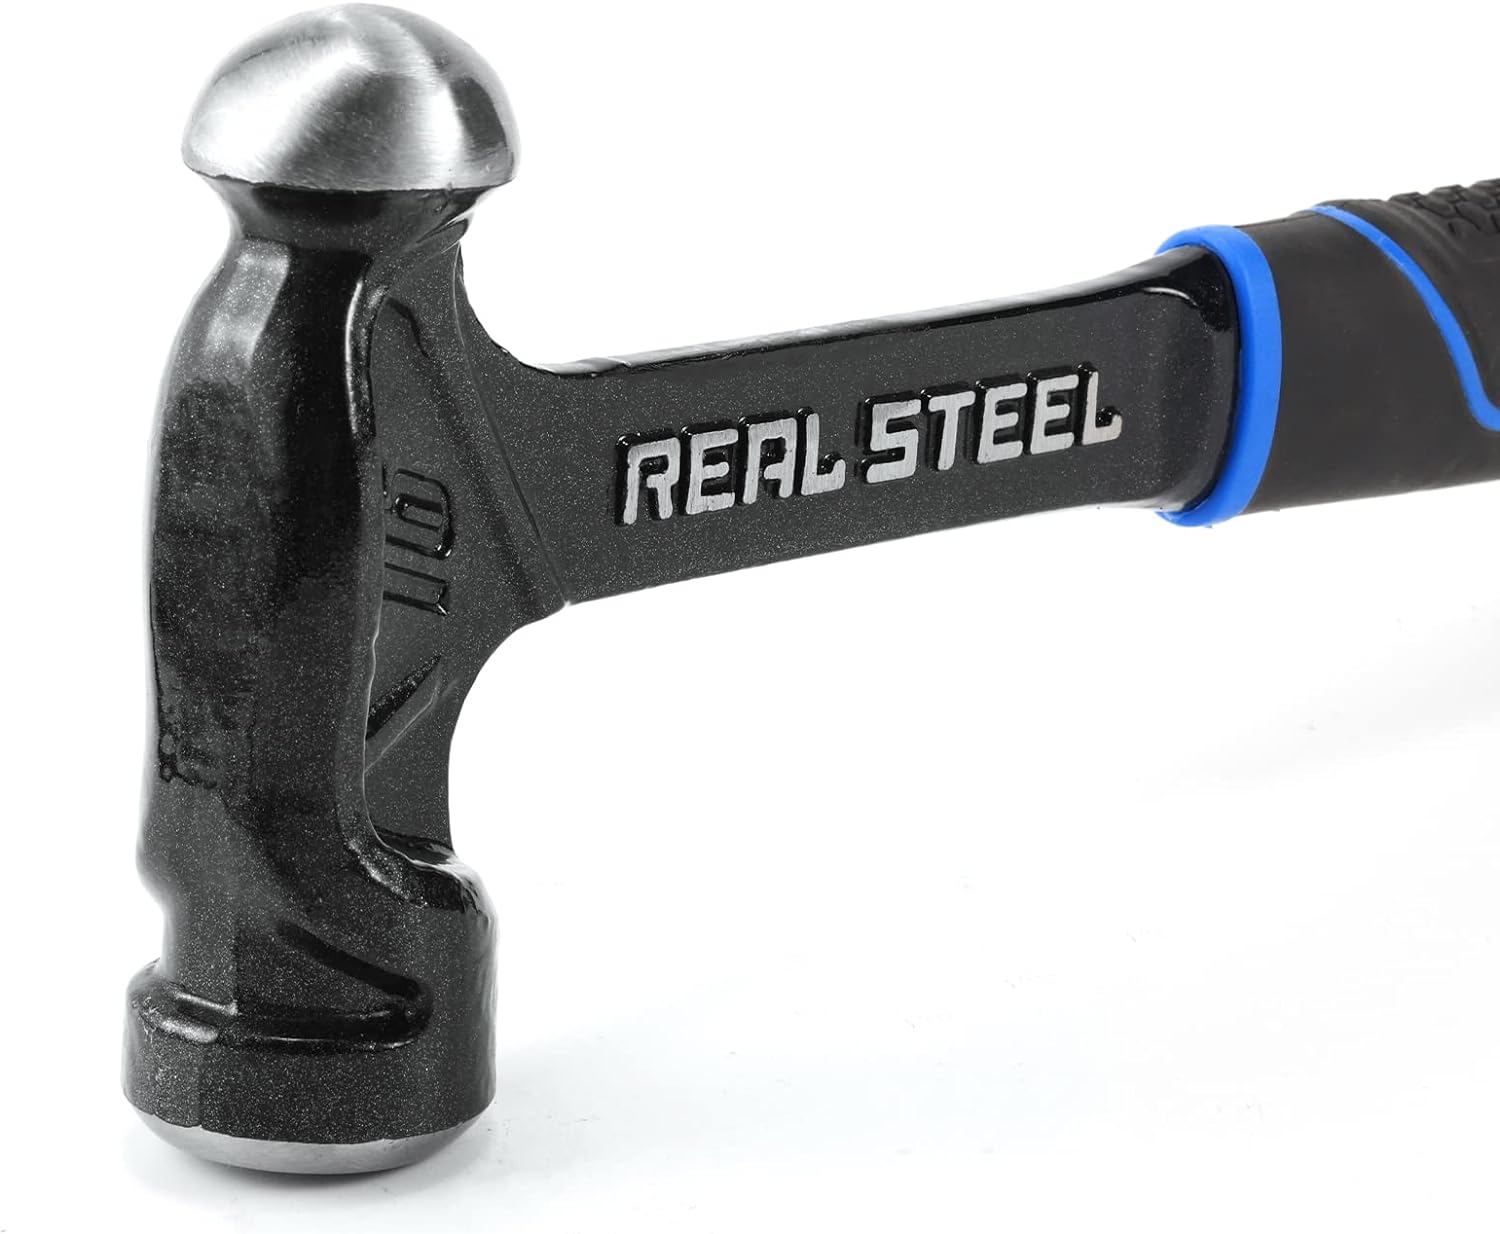 Real Steel Hammer Ball Pein 900g 32oz Ultra Steel Handle Real Steel RSH0520 Power Tool Services